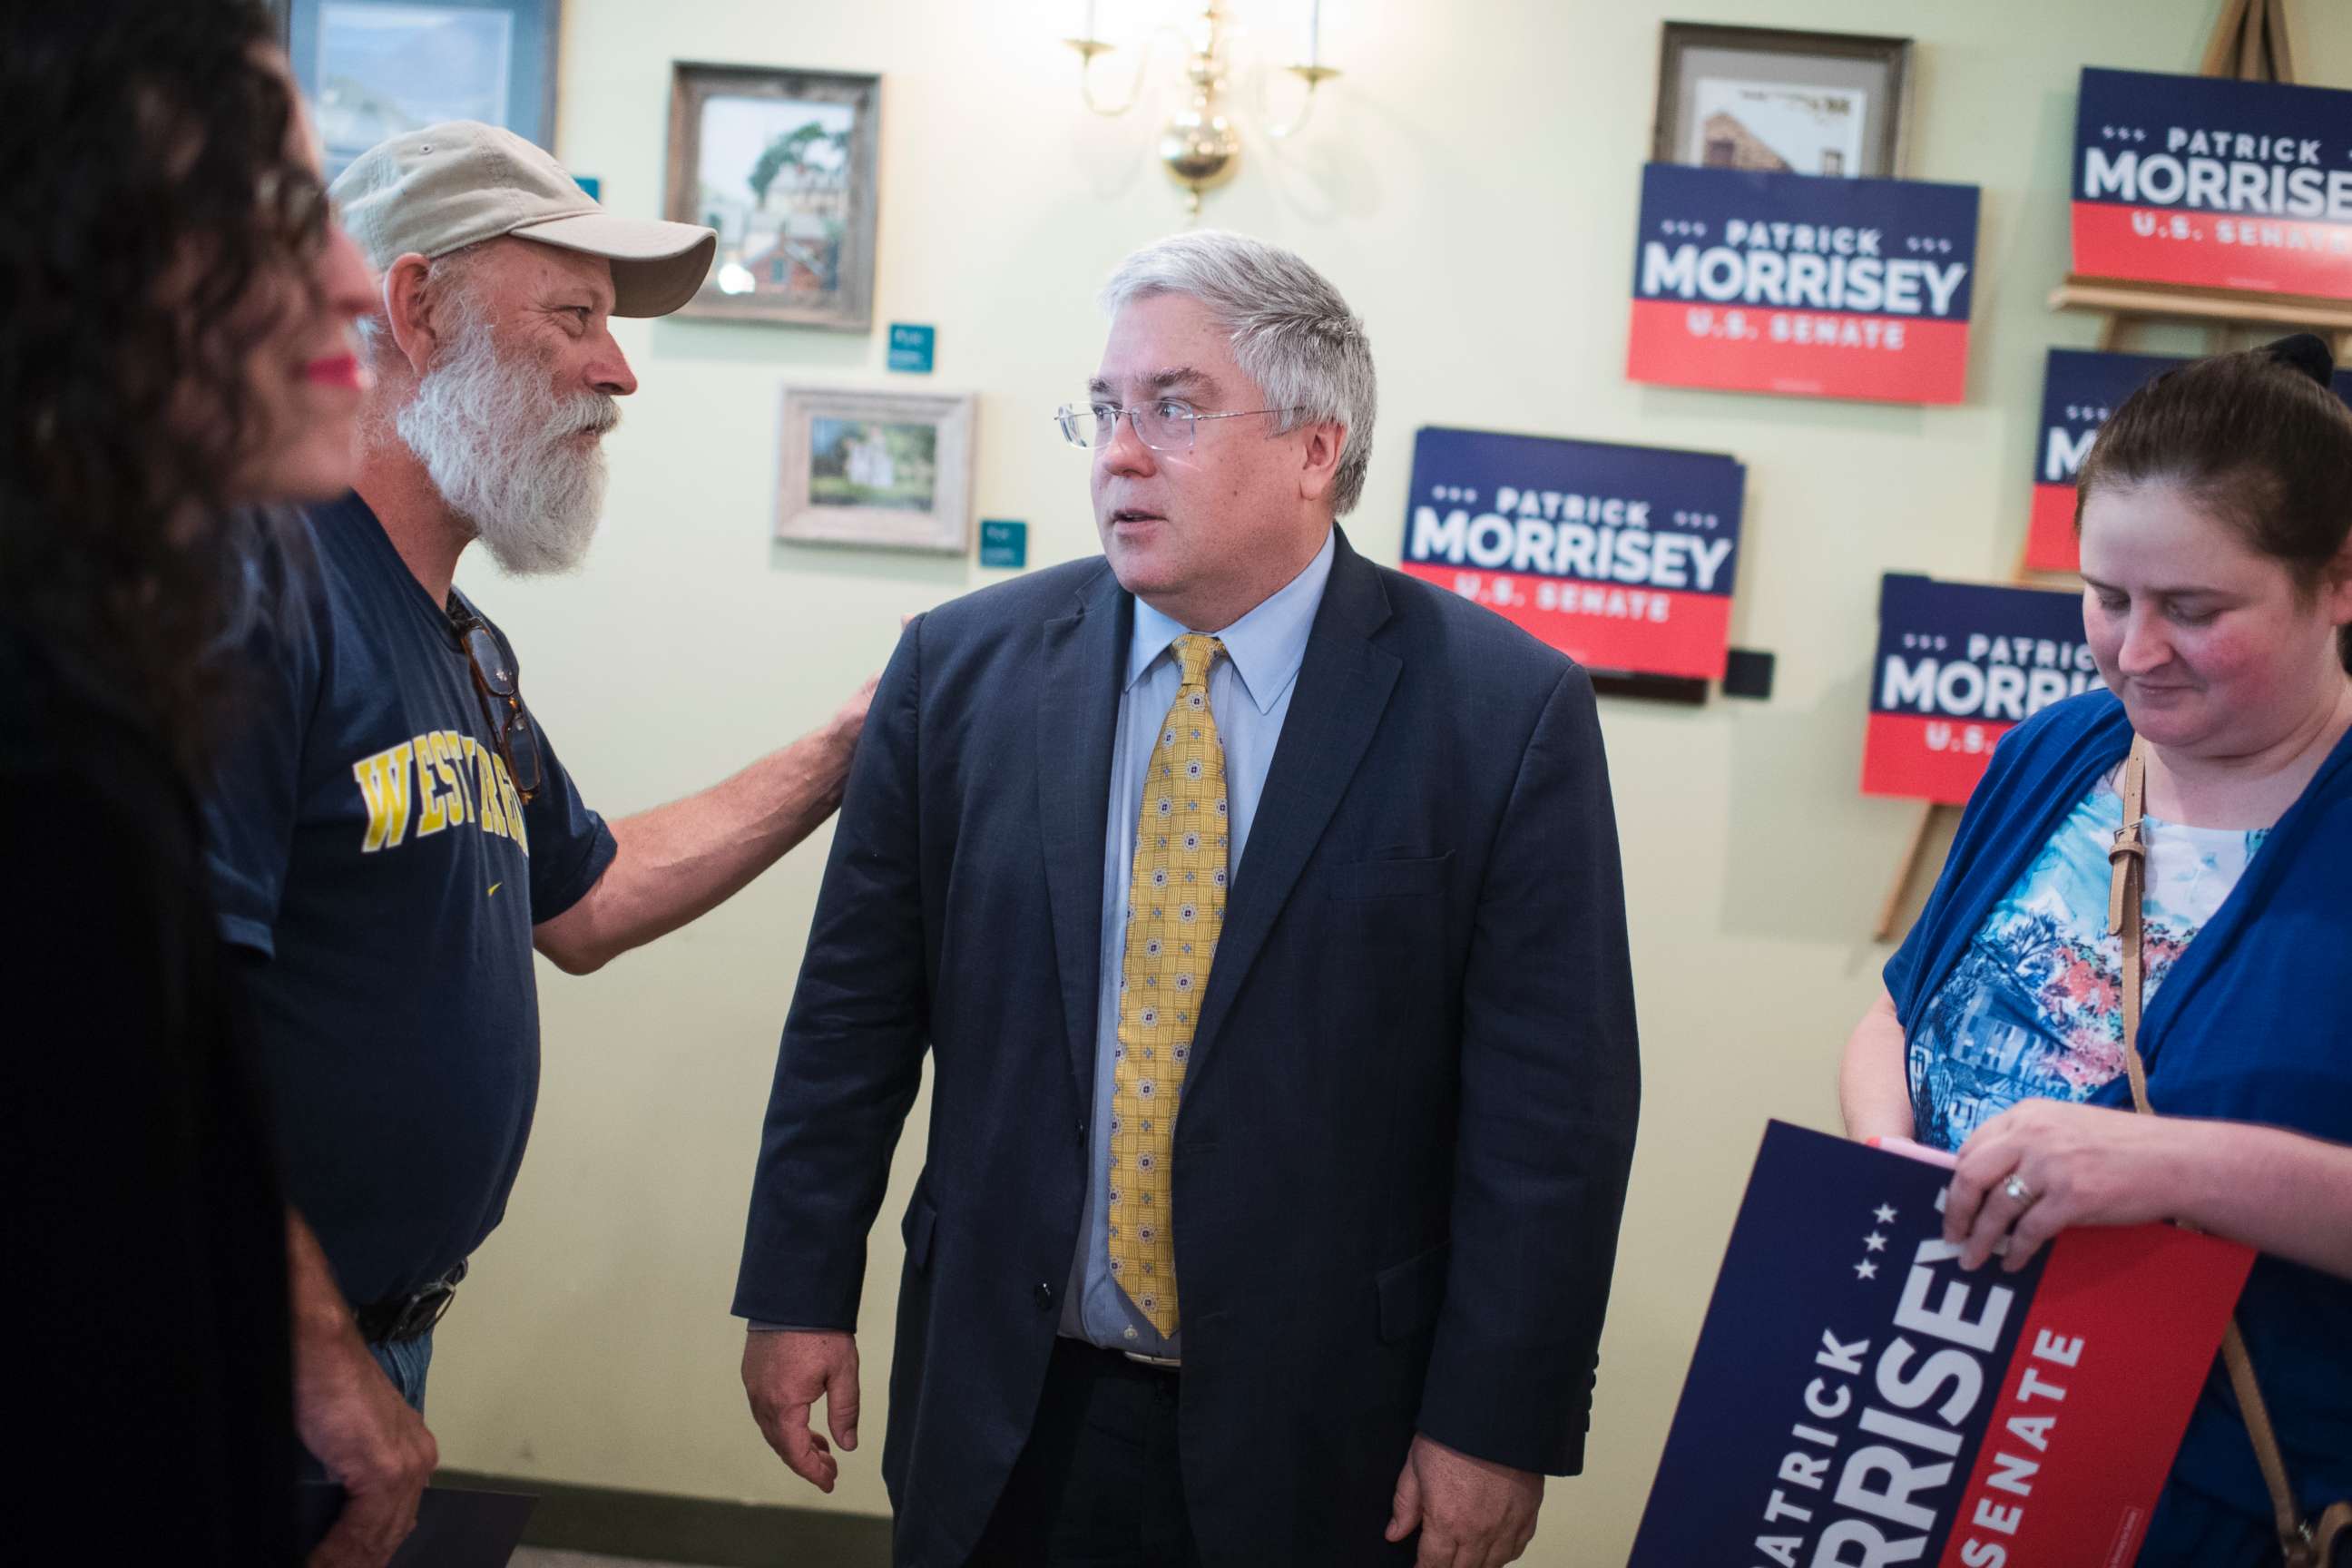 PHOTO: West Virginia Attorney General Patrick Morrisey talks with guests during an event in Harpers Ferry, W.Va., on July 10, 2017, where he announced he will run for the Senate in 2018.